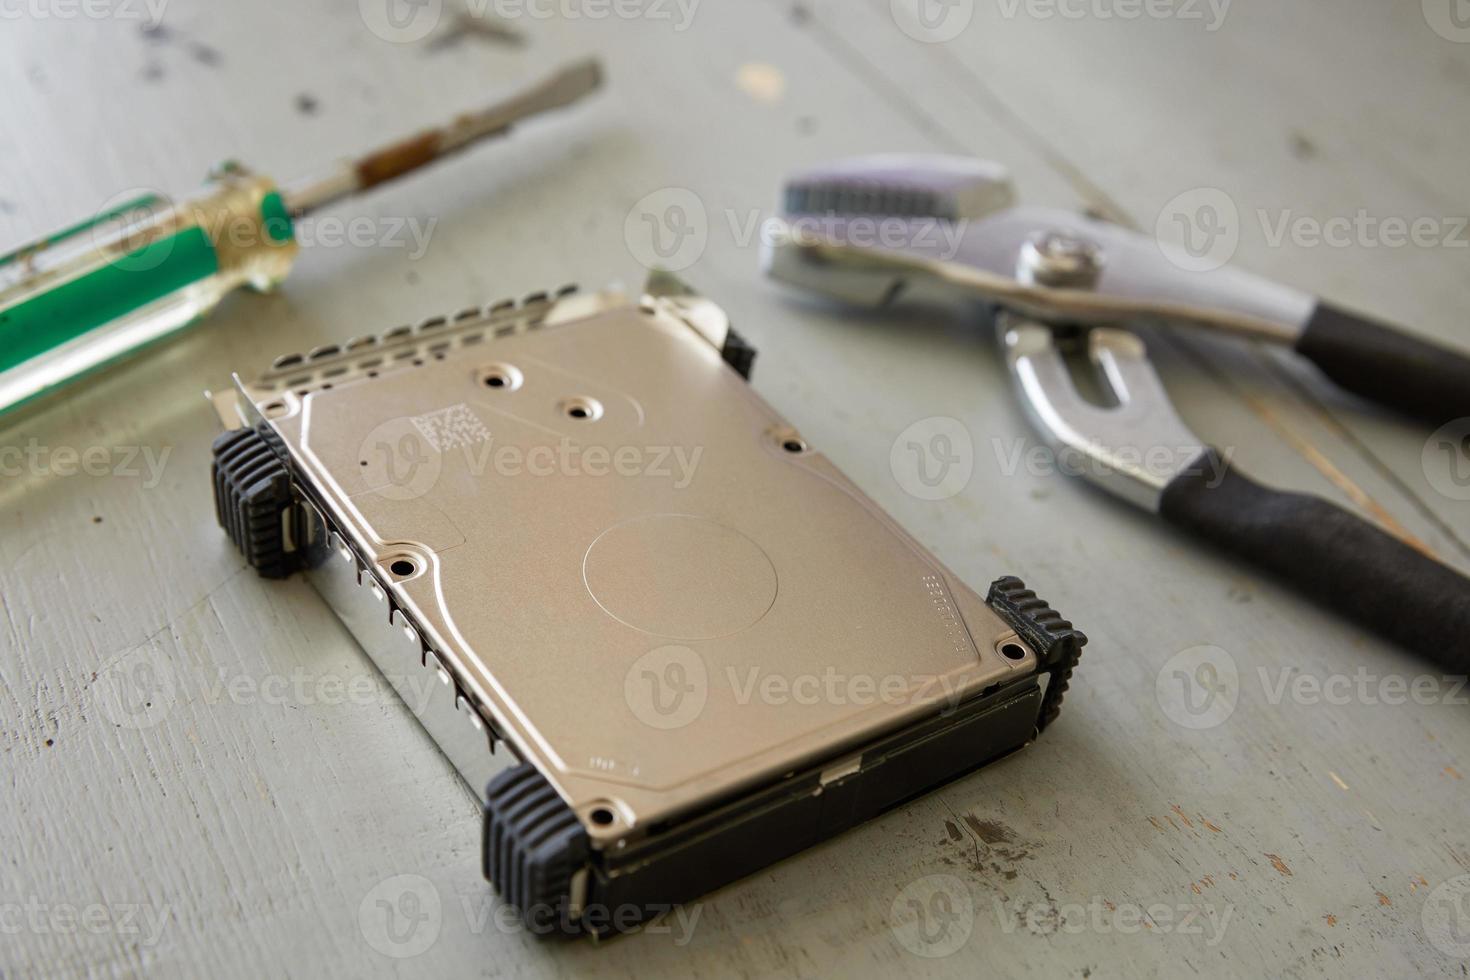 Broken and Destroyed Hard Drive Disk and Tools on Wooden Table photo